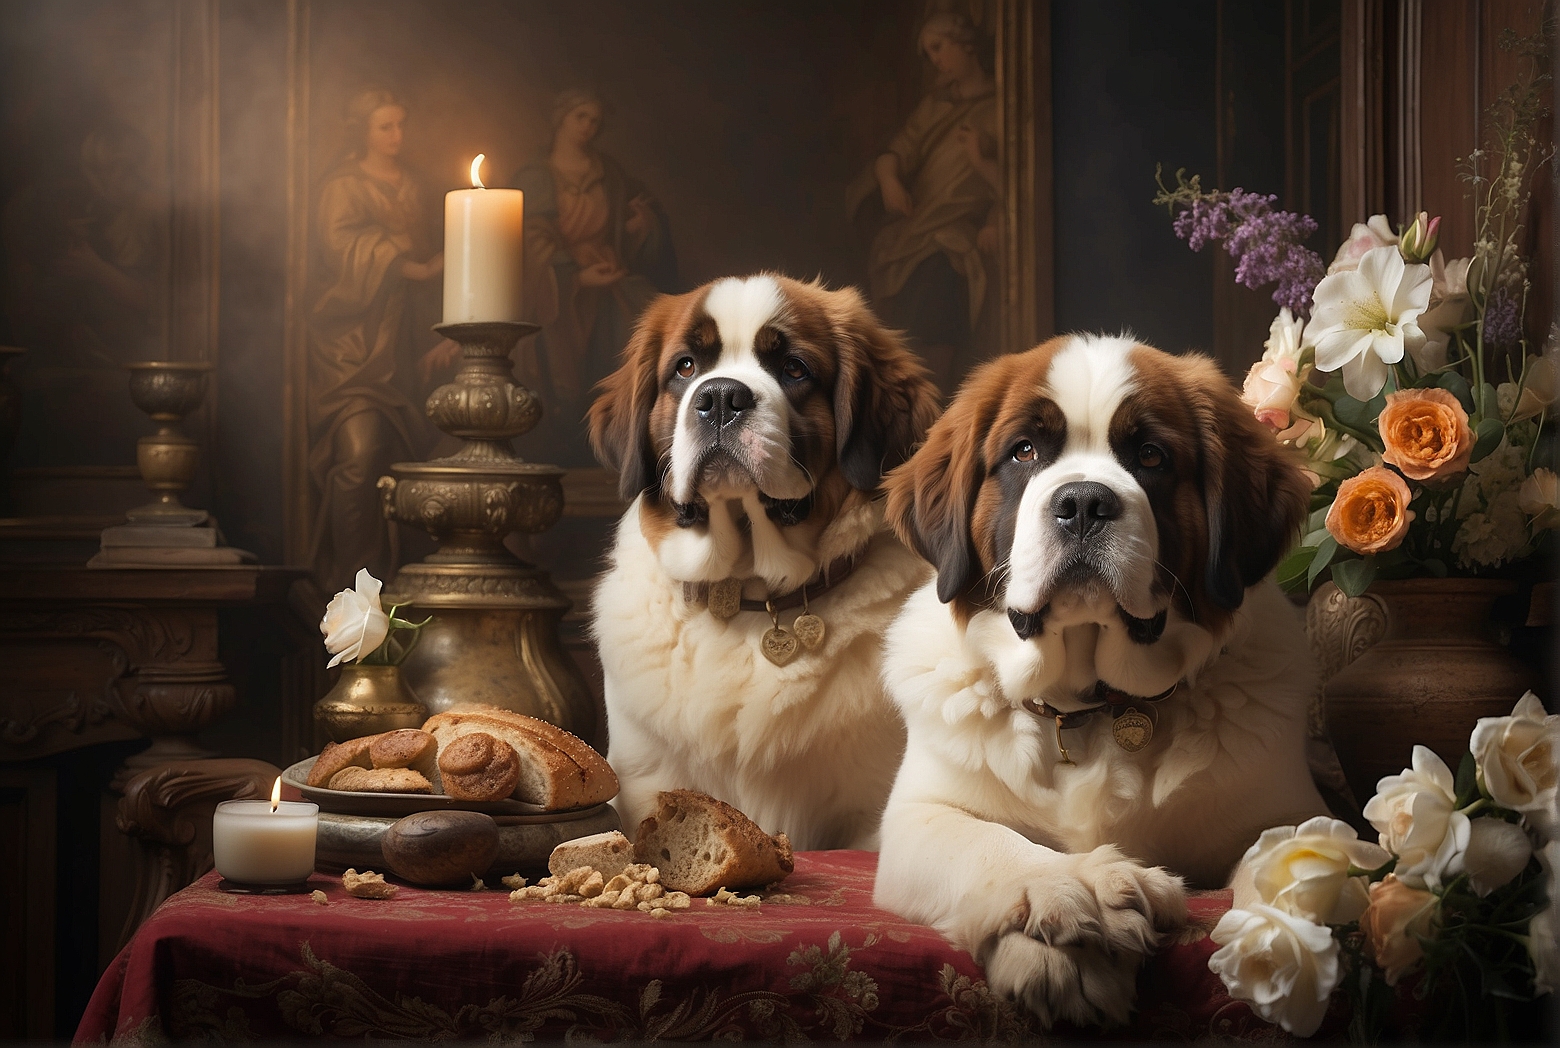 Why Saint Bernards Are the Best Dogs